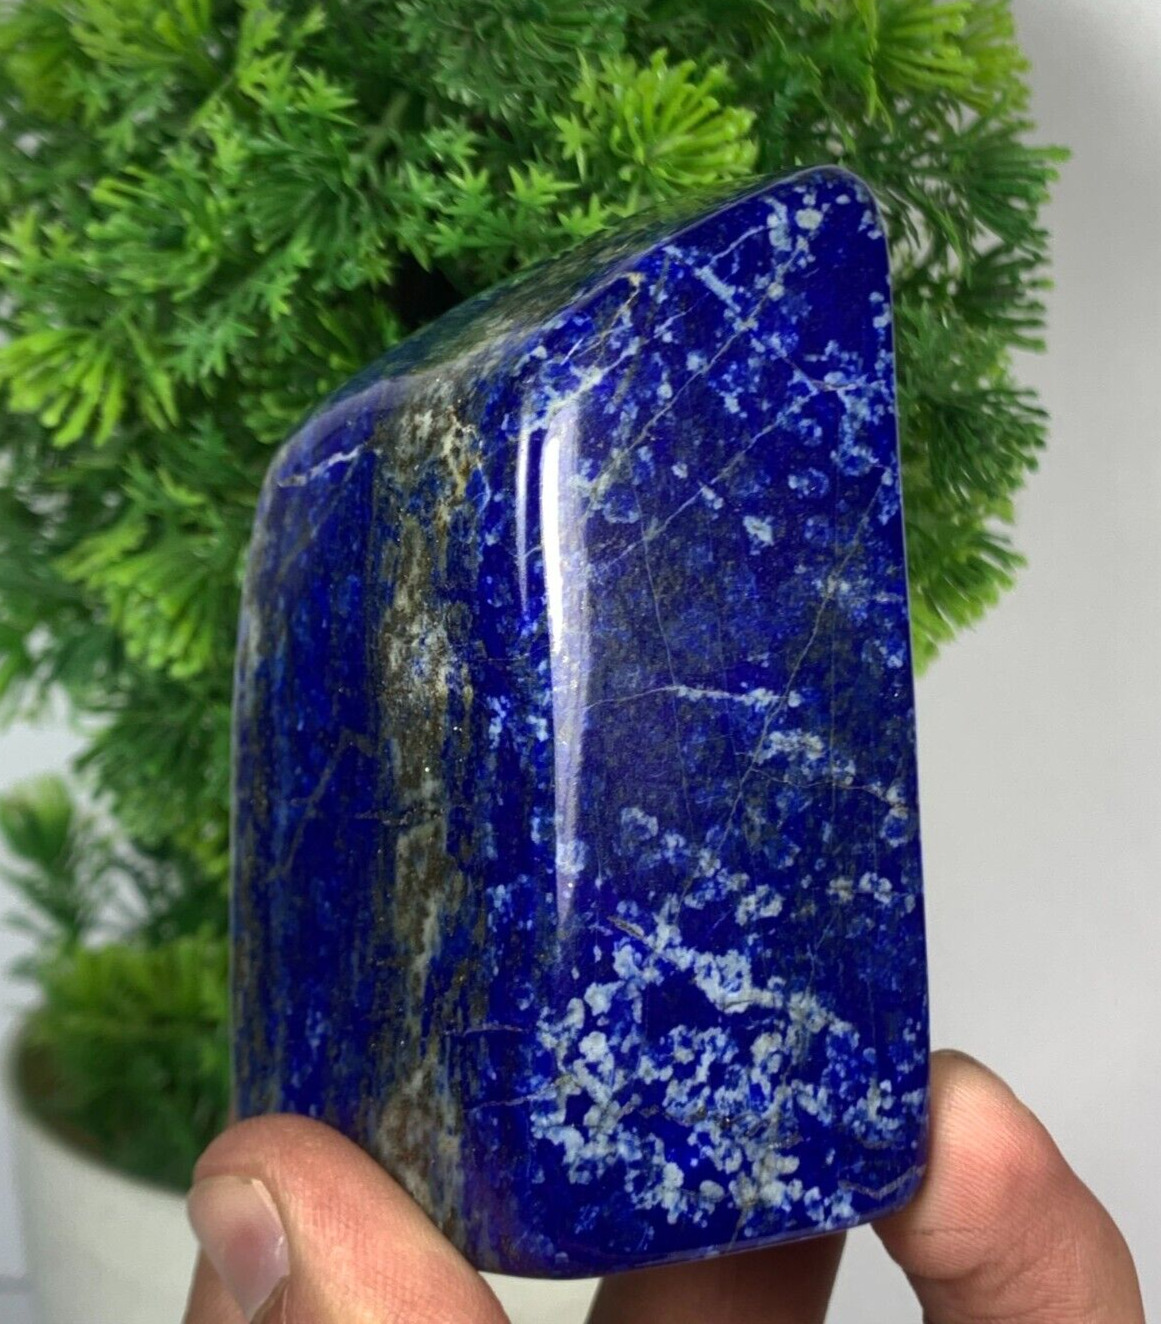 287Gram Lapis Lazuli Freeform Rough Tumbled Polished AAA+ Grade From Afghanistan